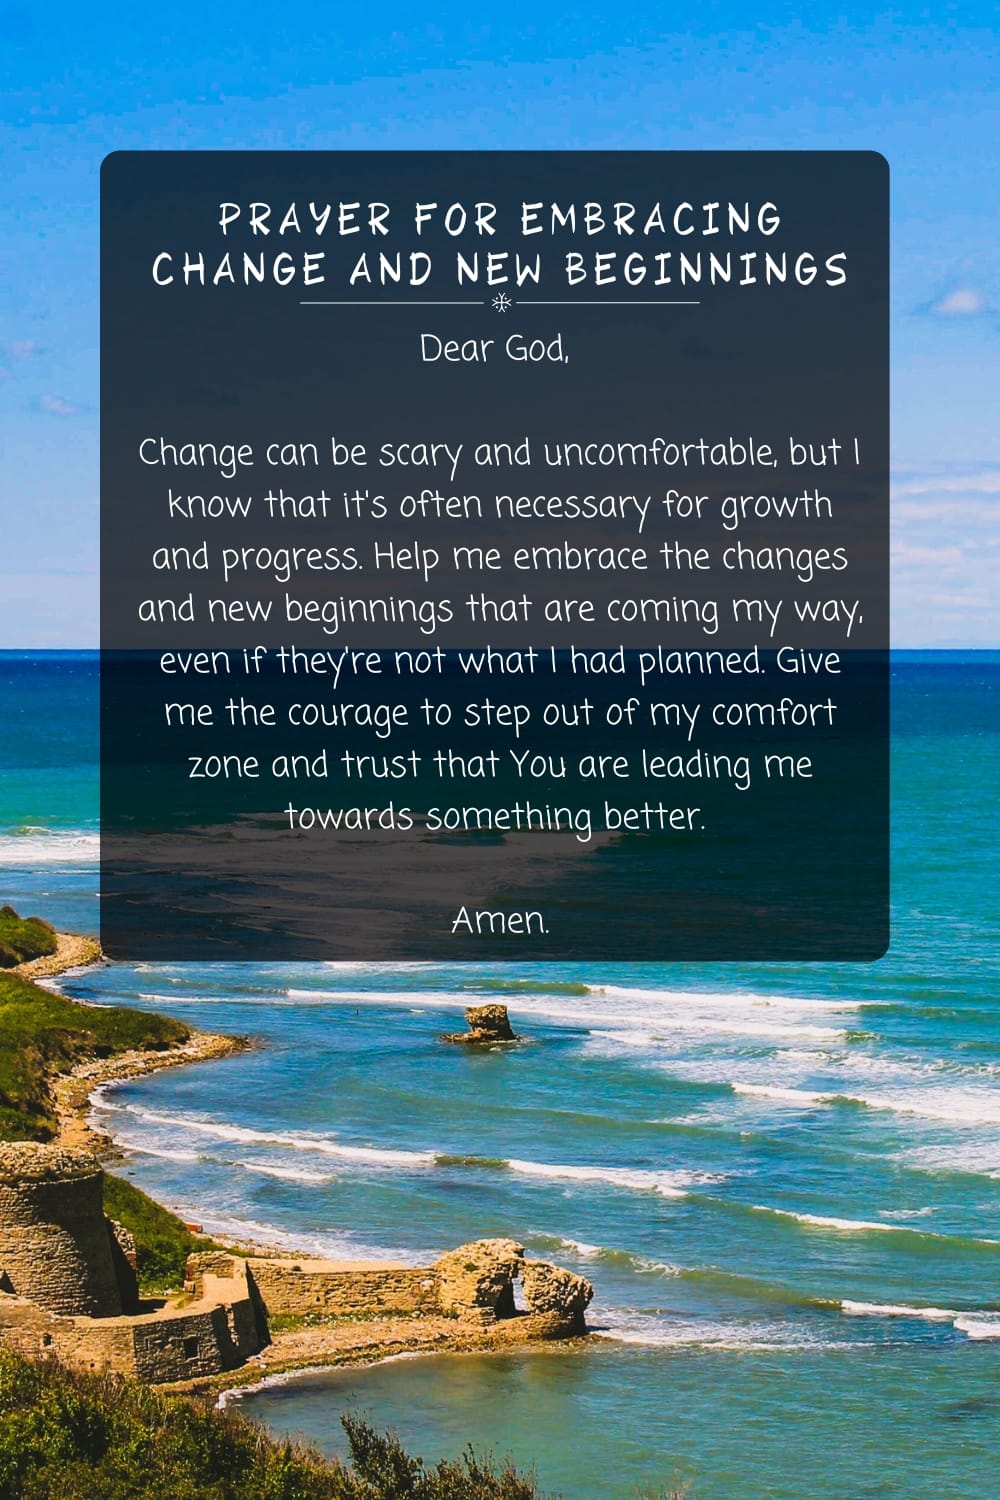 Prayer For Embracing Change and New Beginnings